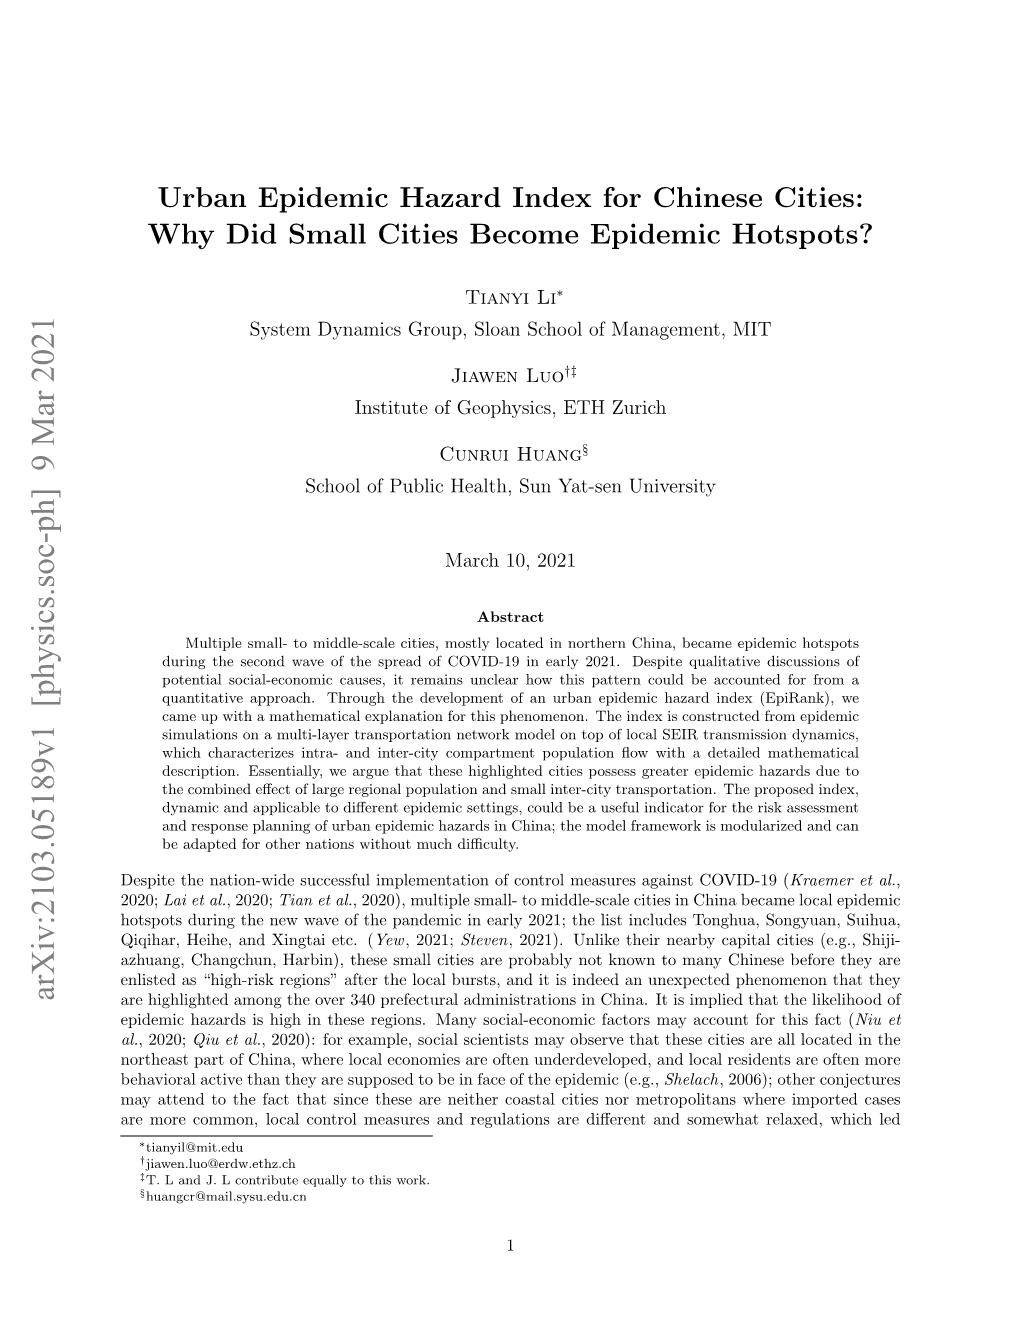 Urban Epidemic Hazard Index for Chinese Cities: Why Did Small Cities Become Epidemic Hotspots?